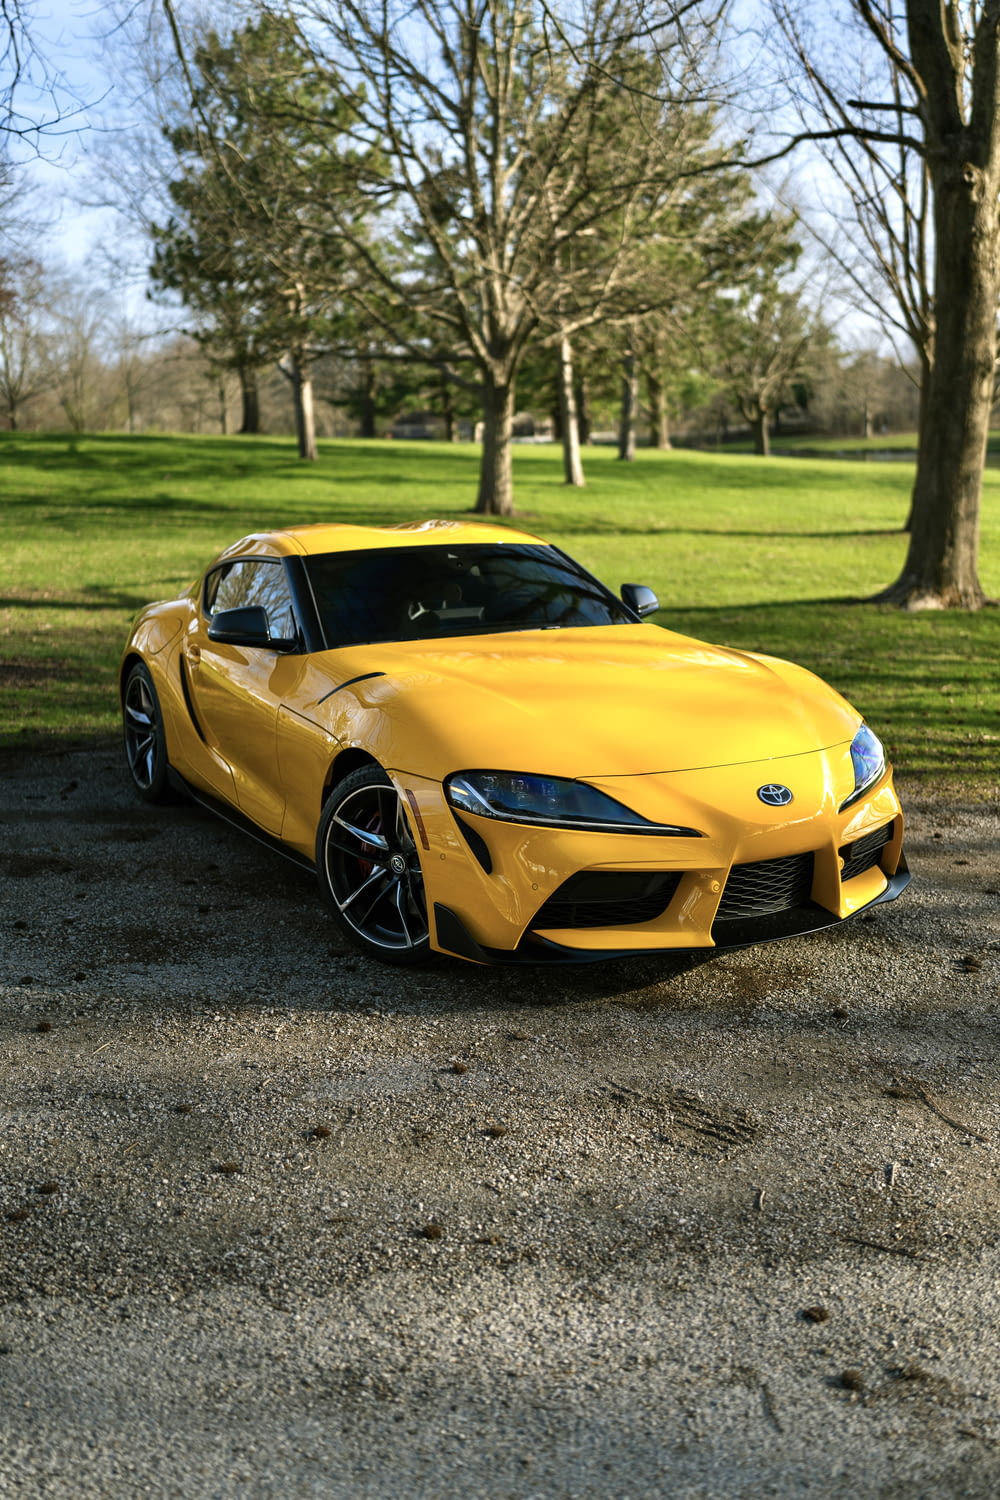 a yellow sports car parked on a road with trees and grass